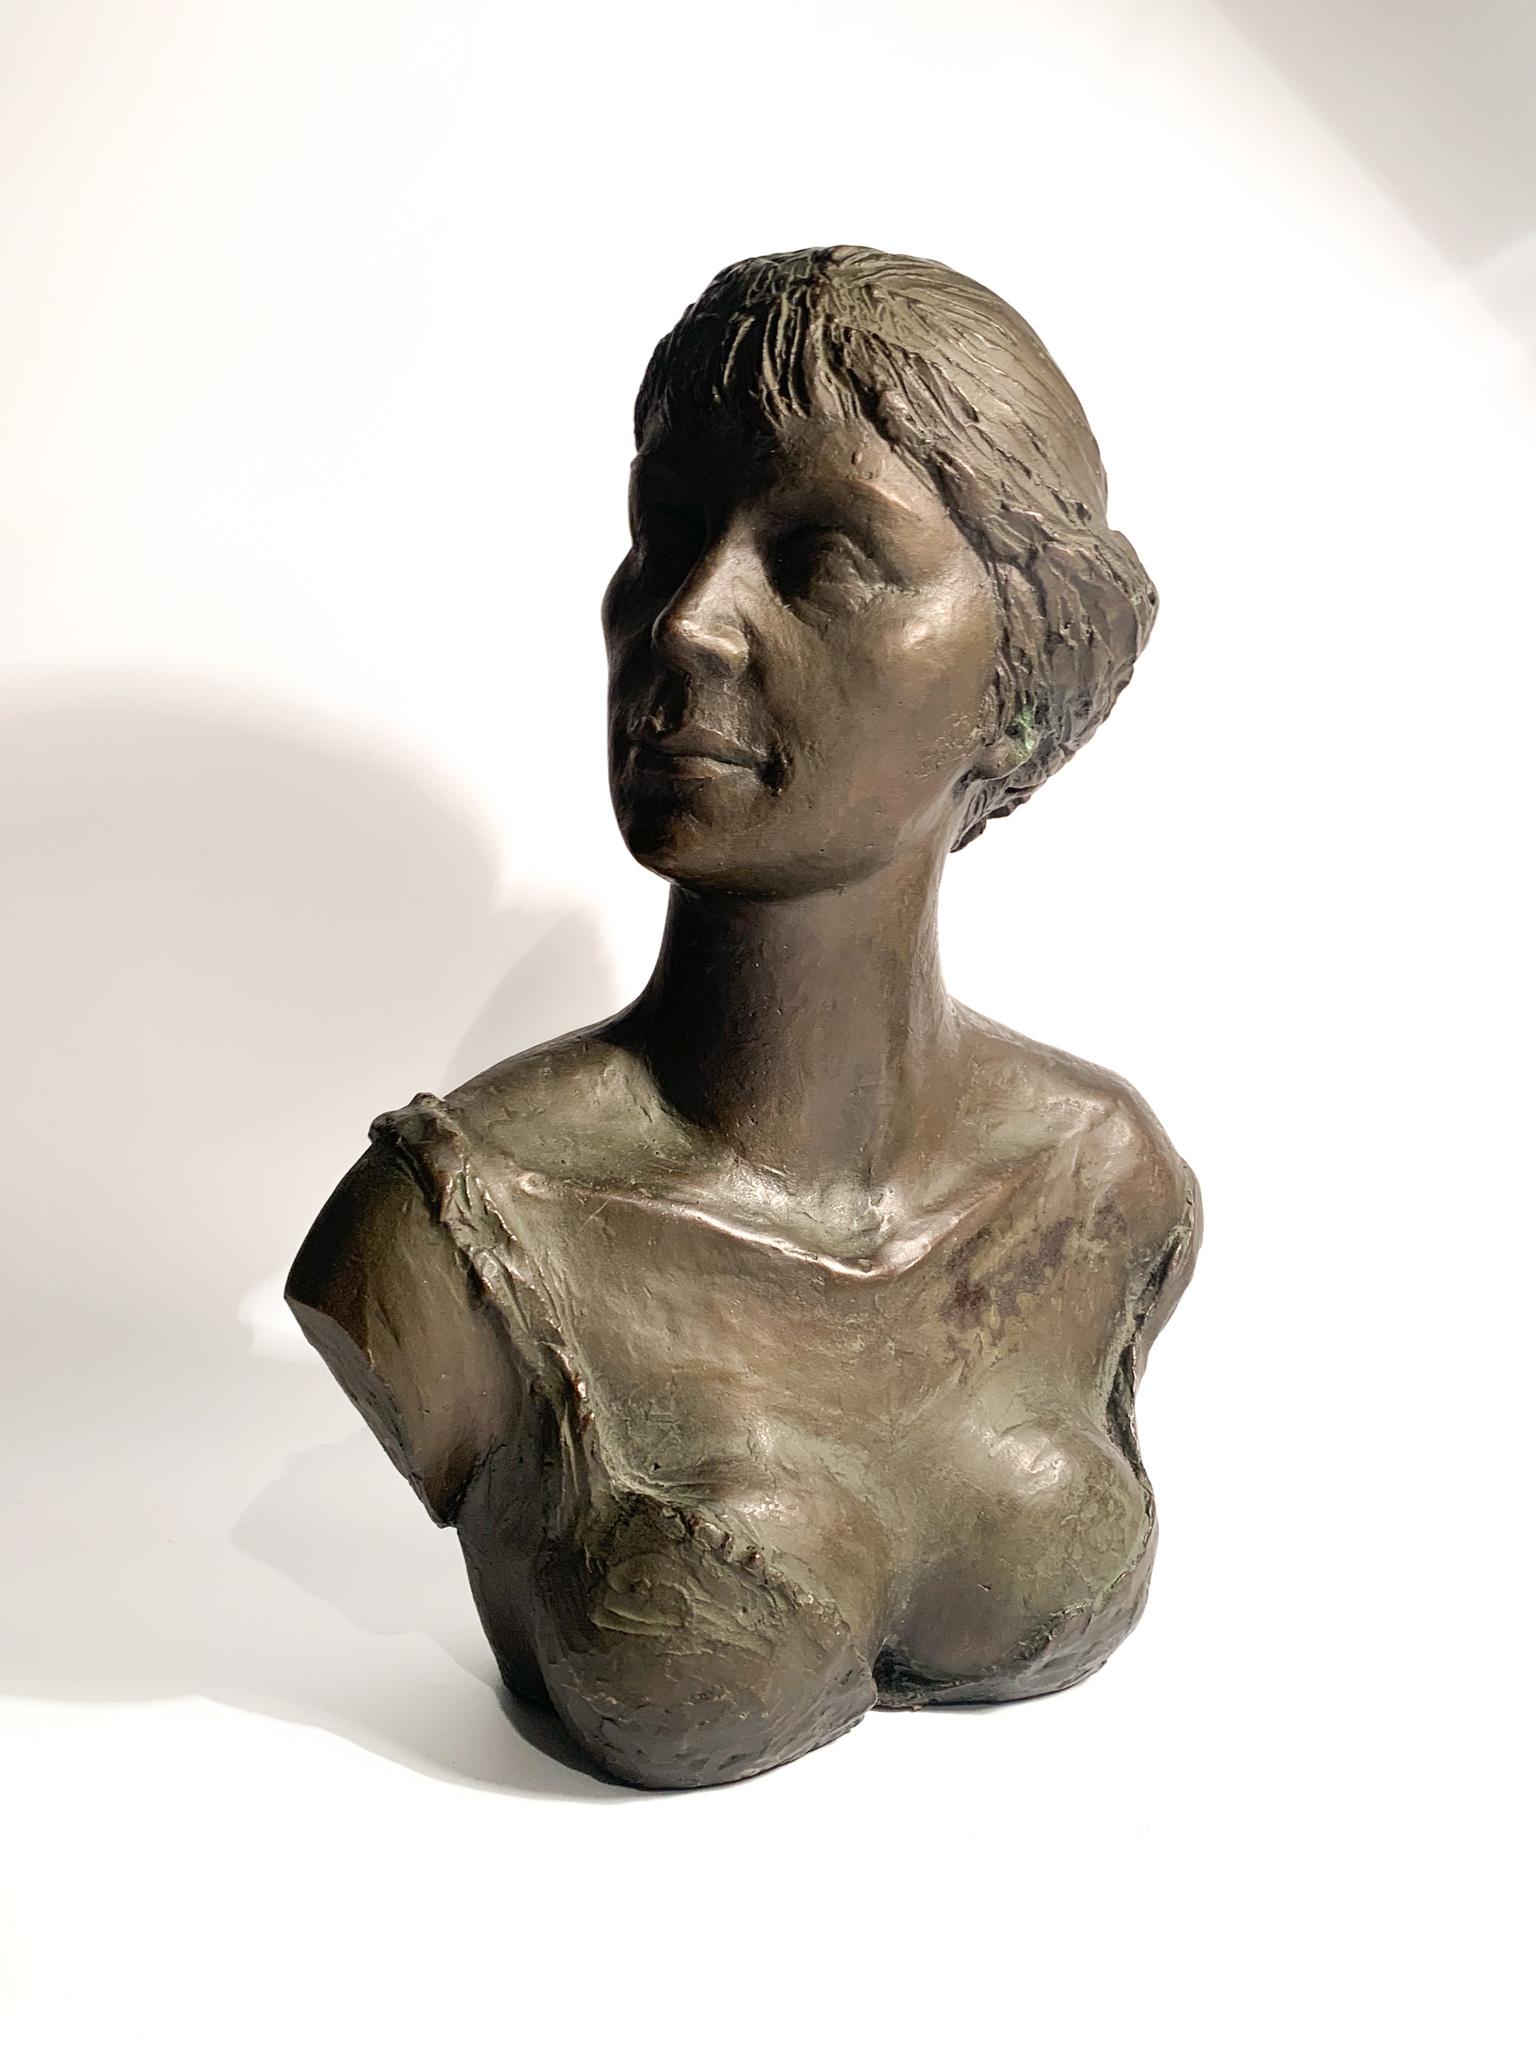 Bronze female bust made with the lost wax technique, created by Giuseppe Motti (1908 - 1988) in the 1950s

Ø 24 cmØ 12 cm h 31 cm